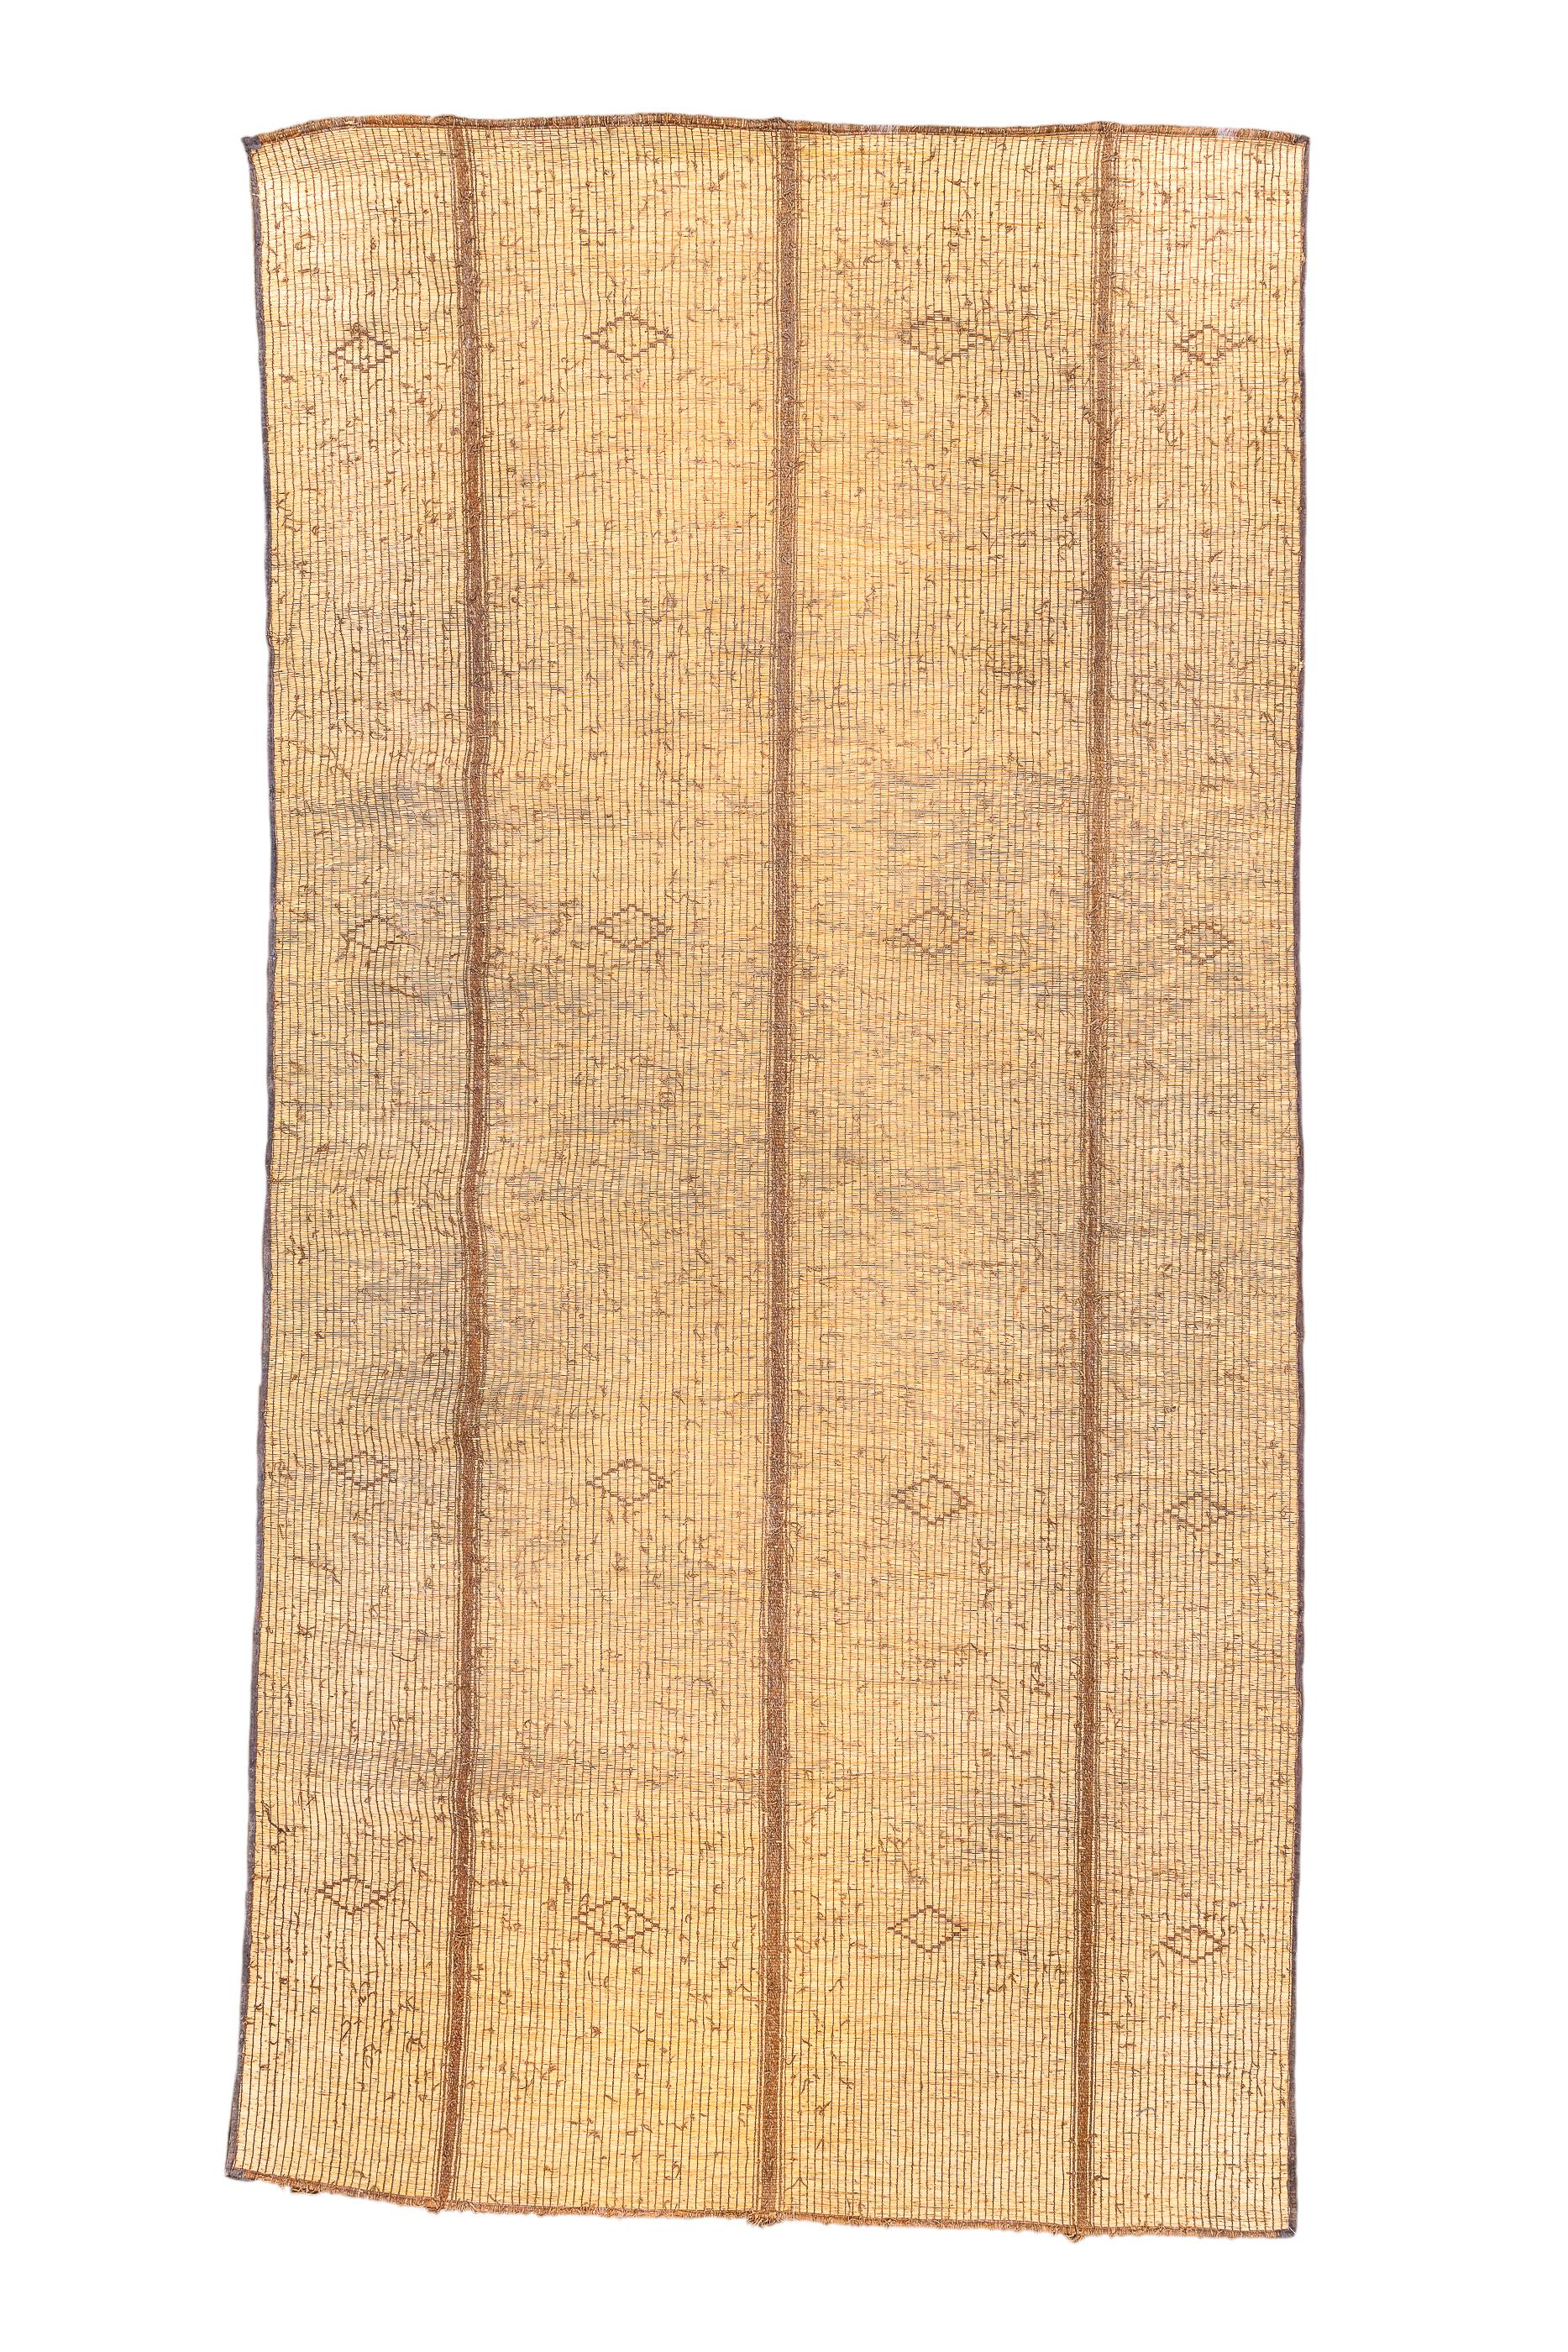 A truly flatwoven, tribal, sustainable carpet in natural tan reeds in four sections.There is a subtle pattern of small lozenges in widely spaced rows. The reeds give a flat surface with a string binding and hairline selvages. A perfect rug to was